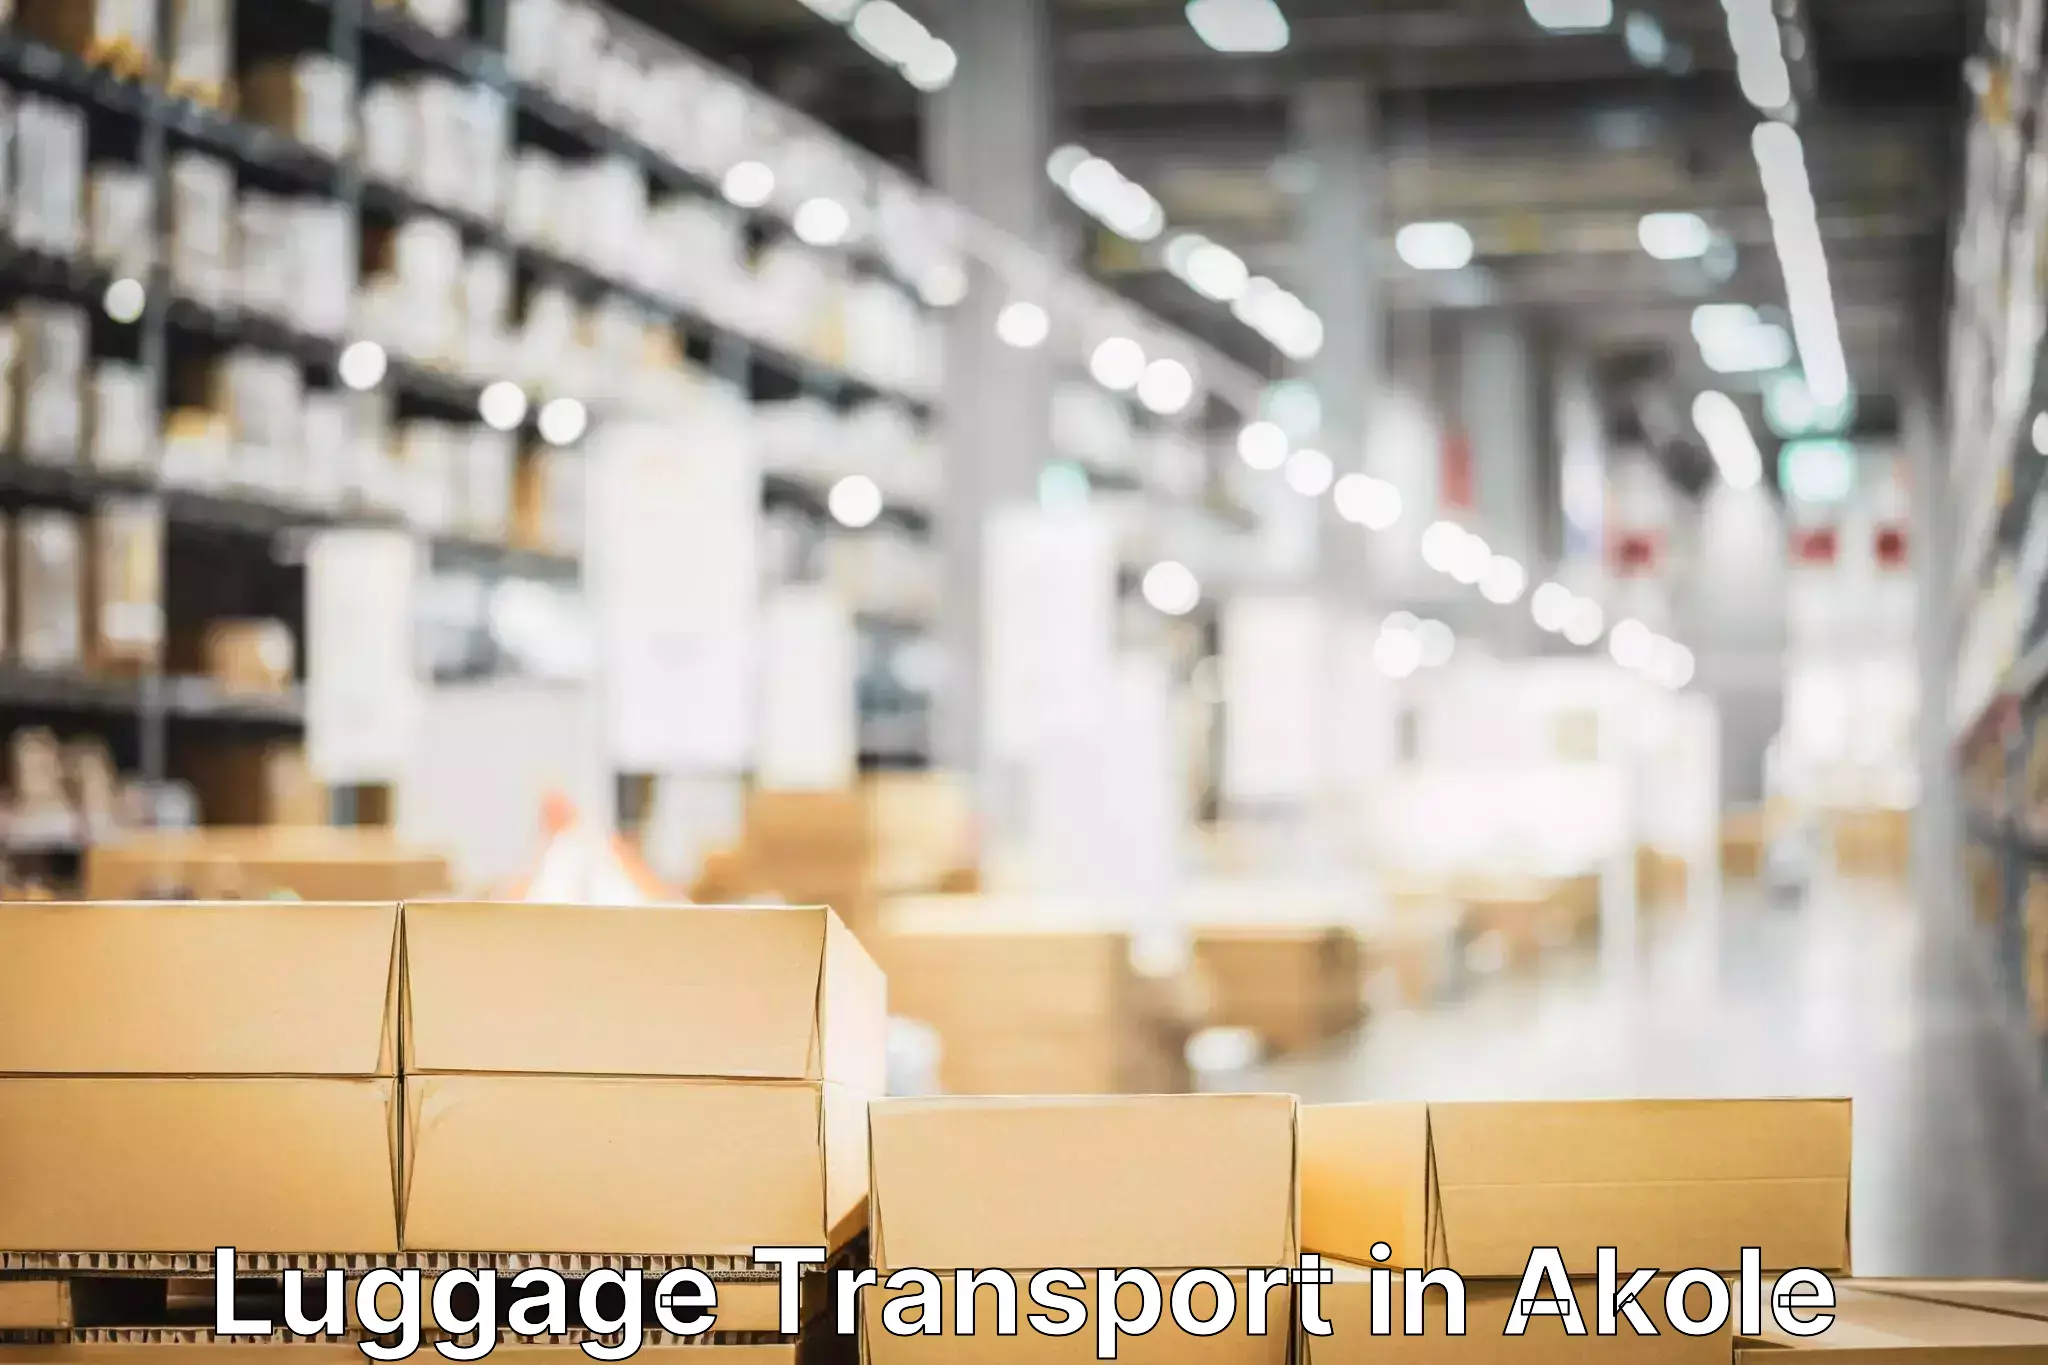 Hotel to Door baggage transport in Akole